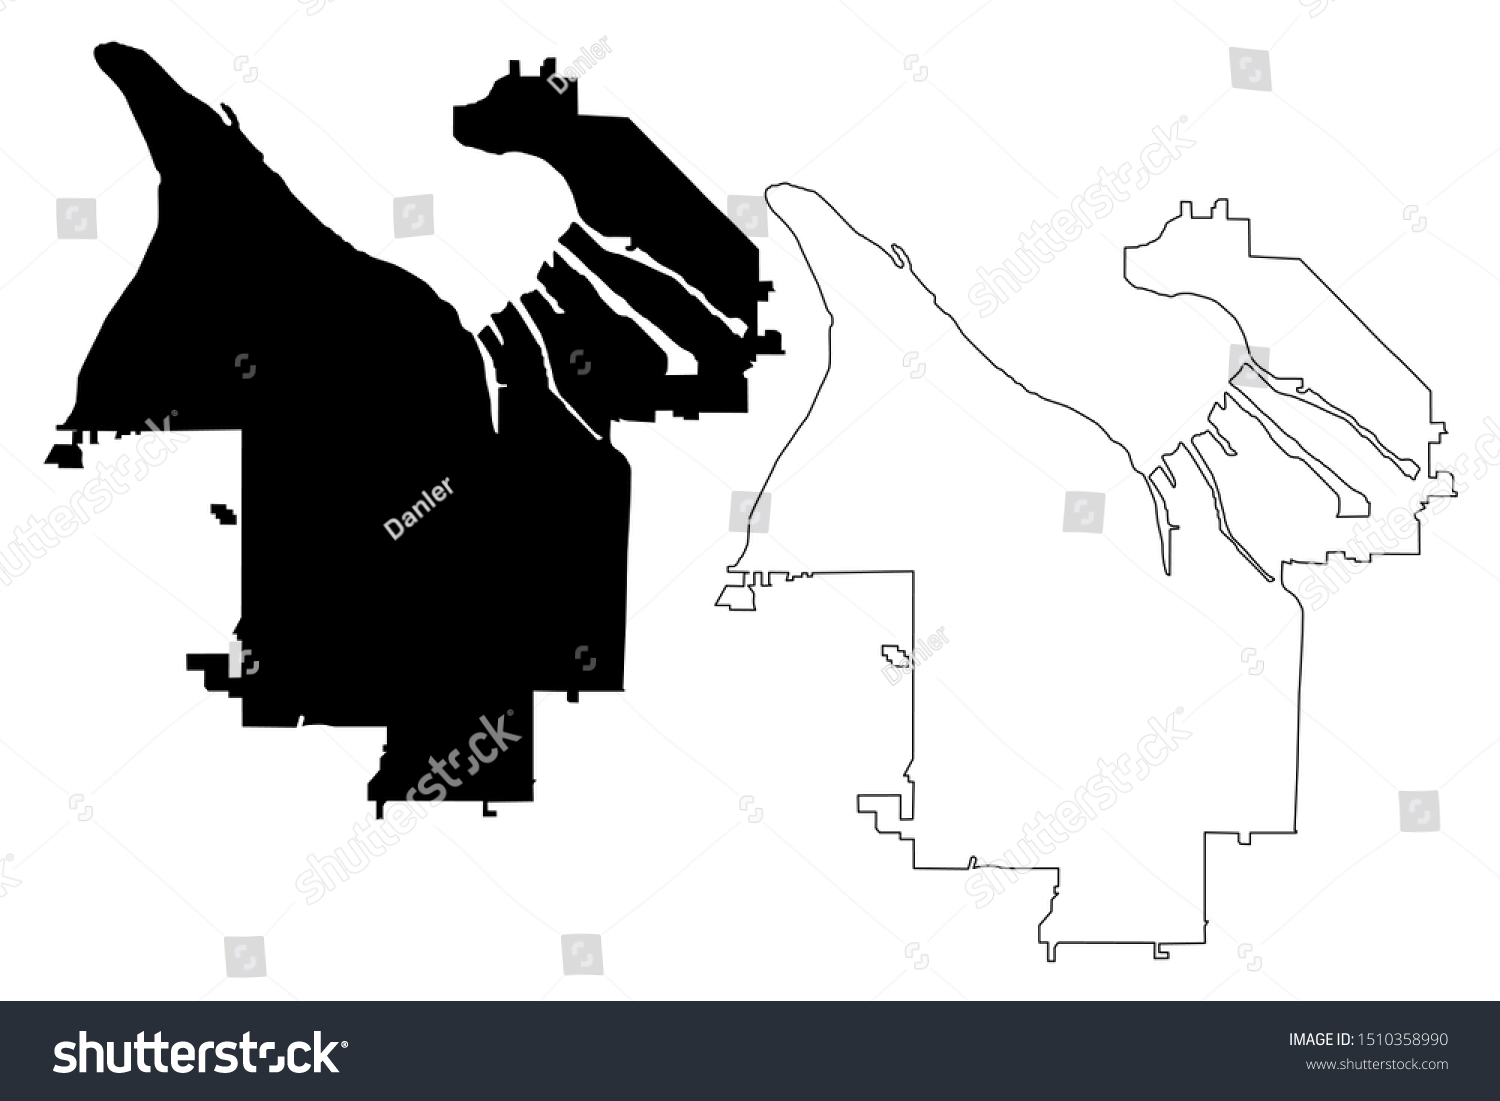 SVG of Tacoma City ( United States cities, United States of America, usa city) map vector illustration, scribble sketch City of Tacoma map svg